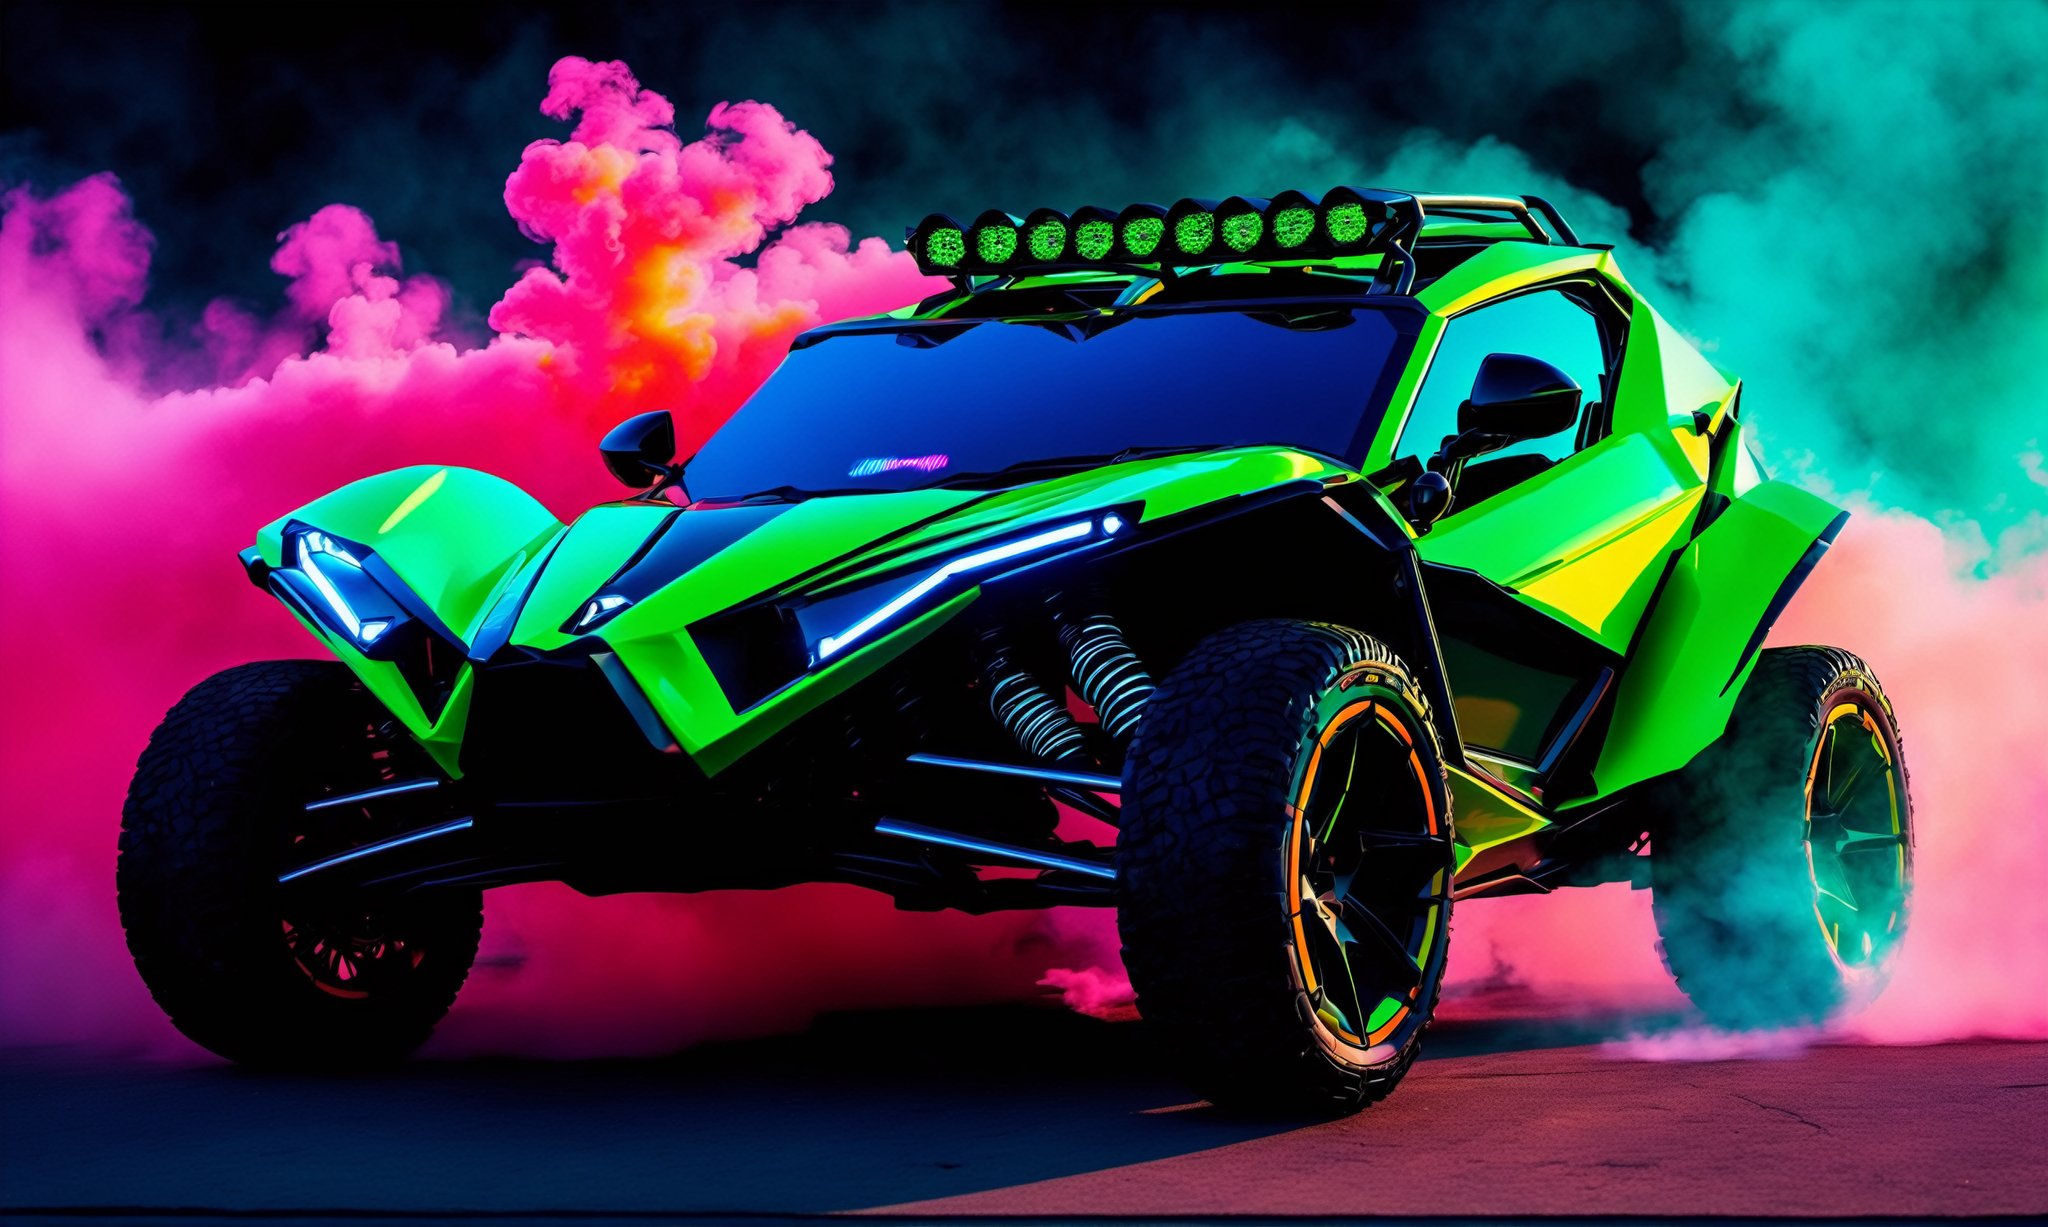 front  view of a green Ariel Nomad with headlights on and a light bar on the roof with the light on,  background of colorful smoke , ✏️🎨, 8k stunning artwork, vapor wave, neon smoke, hyper colorful, stunning art style, car with holographic paint, amazing wallpaper, futuristic art style, 8 k highly detailed ❤🔥 🔥 💀 🤖 🚀4k phone wallpaper, inspired by Mike Winkelmann, 